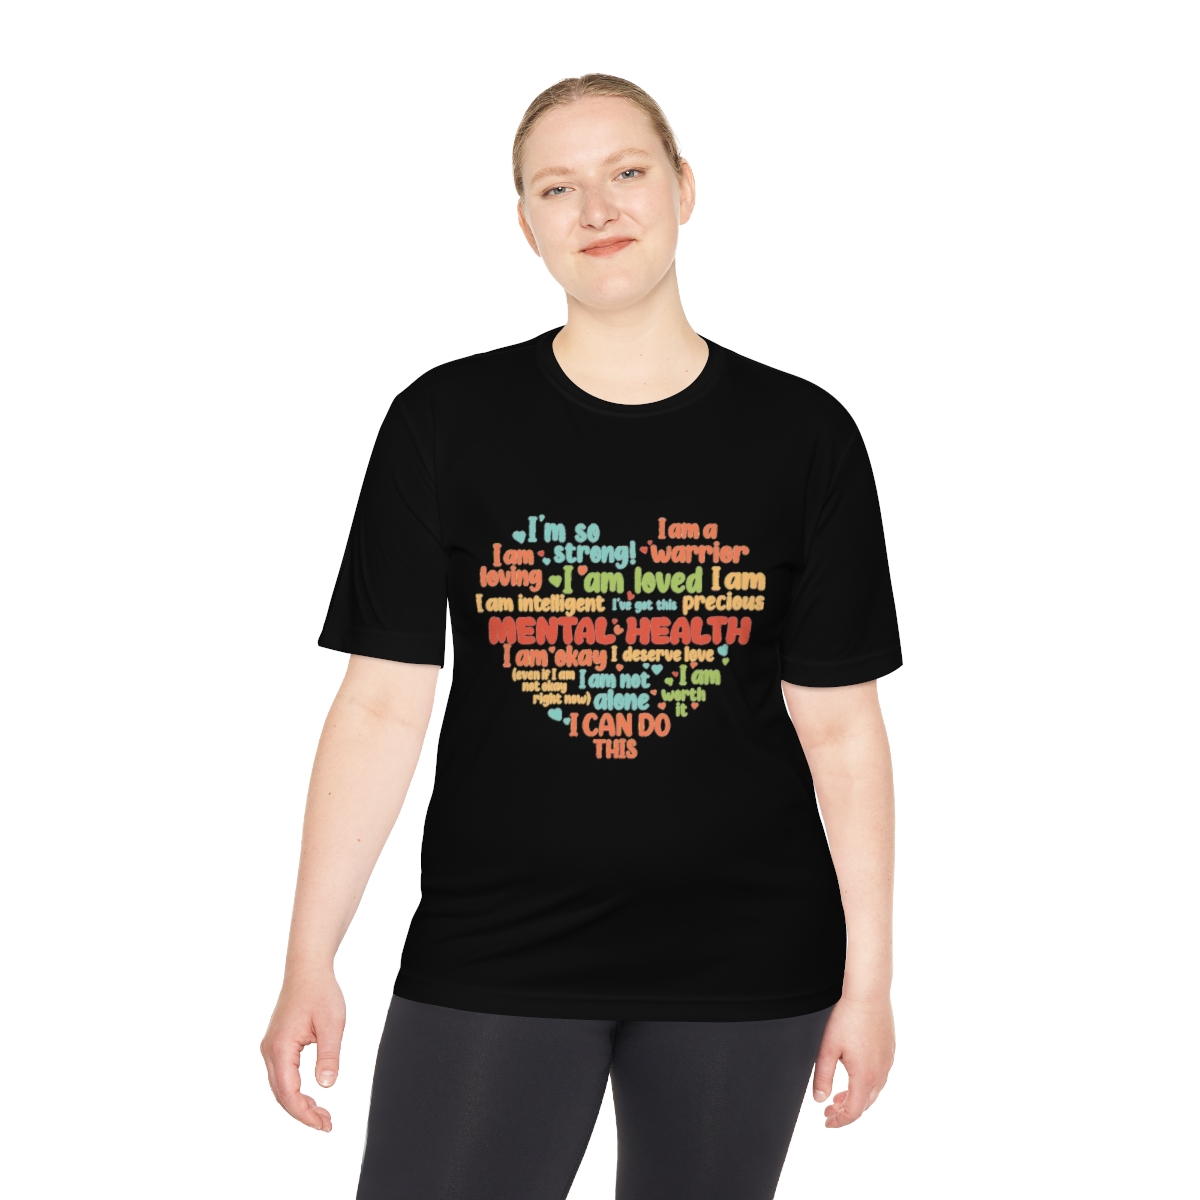 Inspirational and Motivational Recovery T-shirt is All About Self-Love! #gymwear #athletic #exercise product thumbnail image